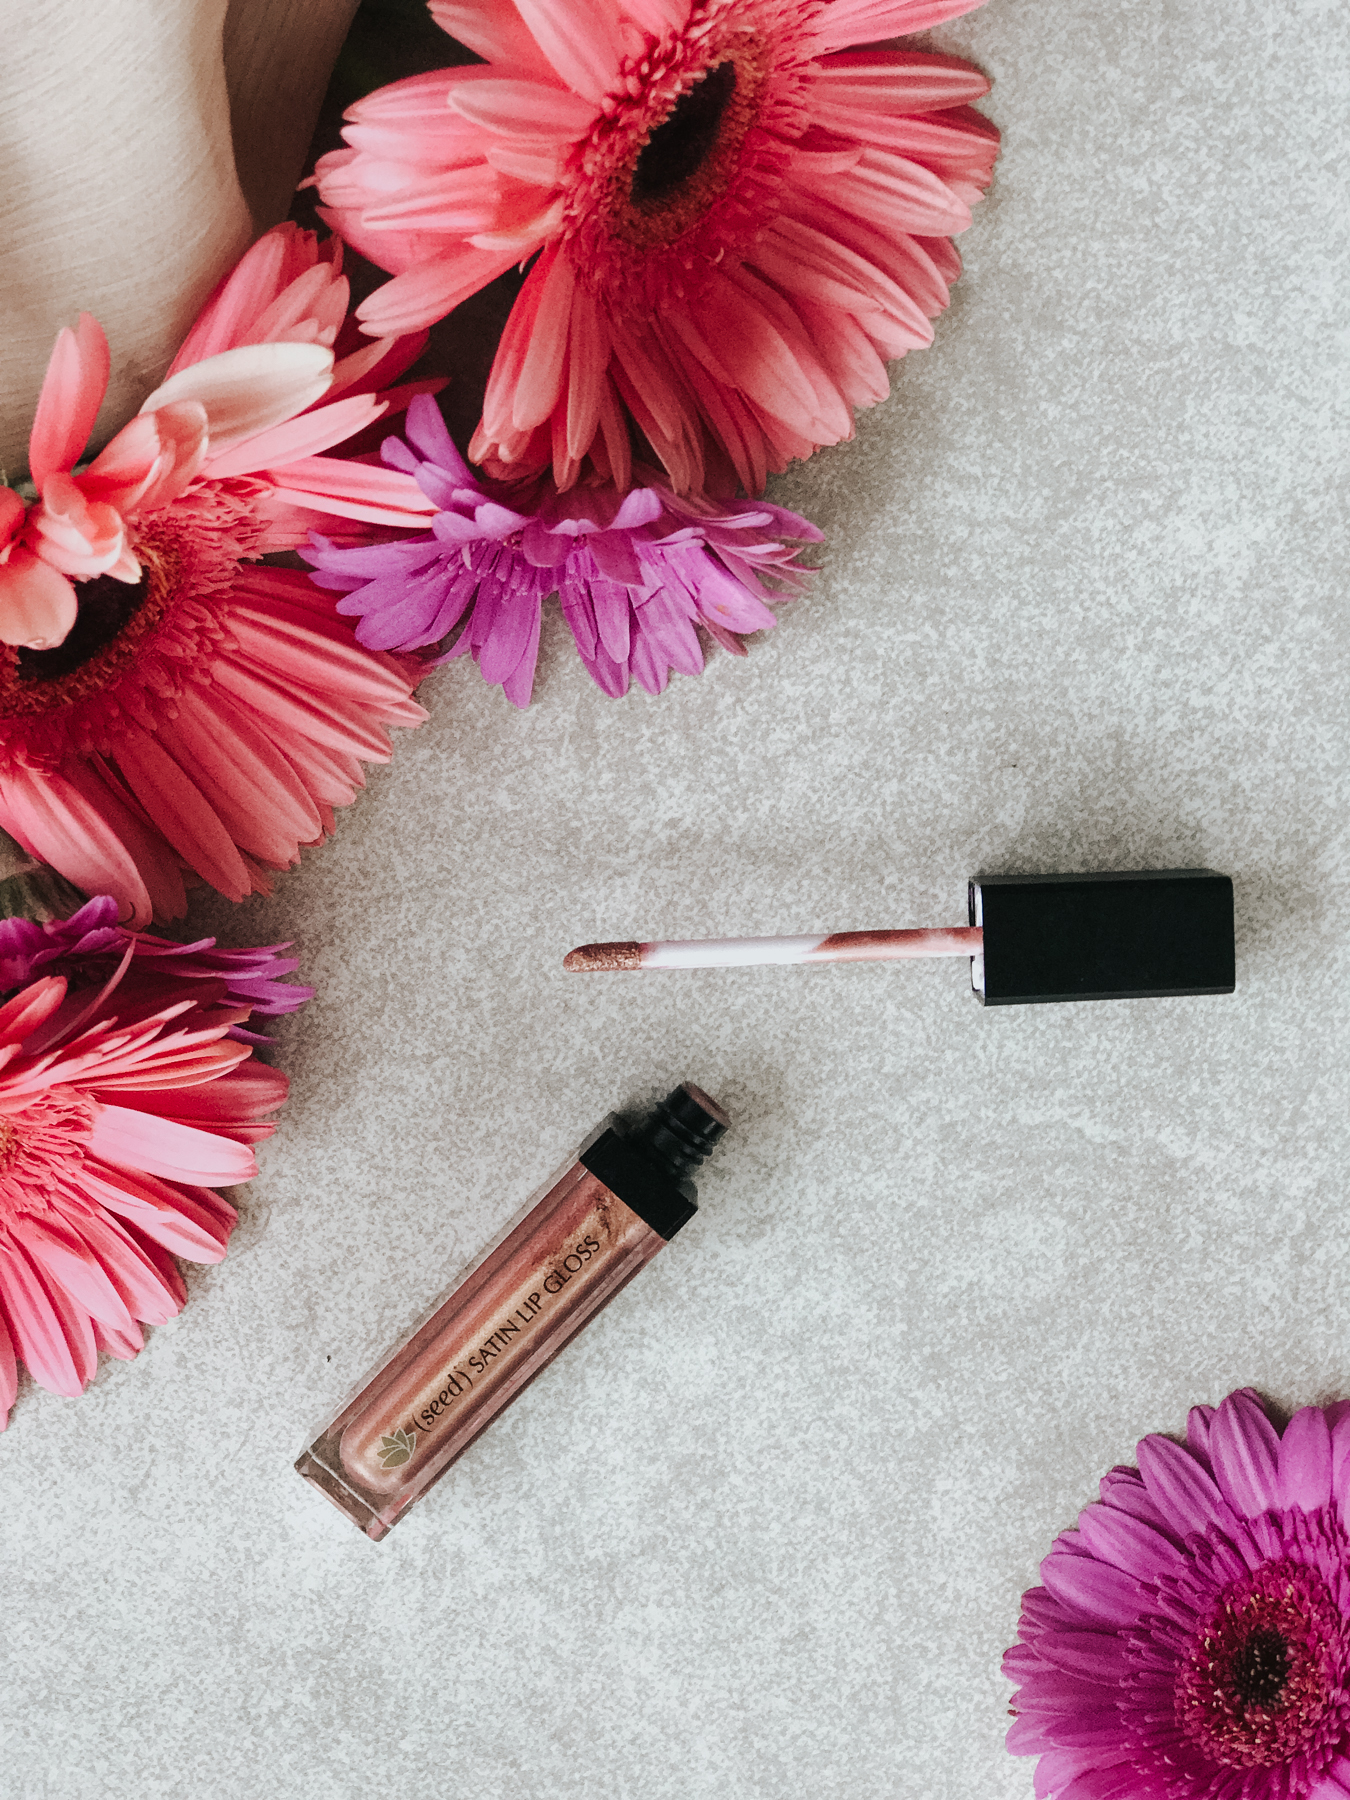 Seed Body Care's Satin Lip Glass softens your lips, is packed with nourishing seed ingredients, and the colors are GORGEOUS. It's also cruelty-free, paraben-free, phthalate-free, and lead-free. This all natural lip color gives a subtle, satiny shine. 